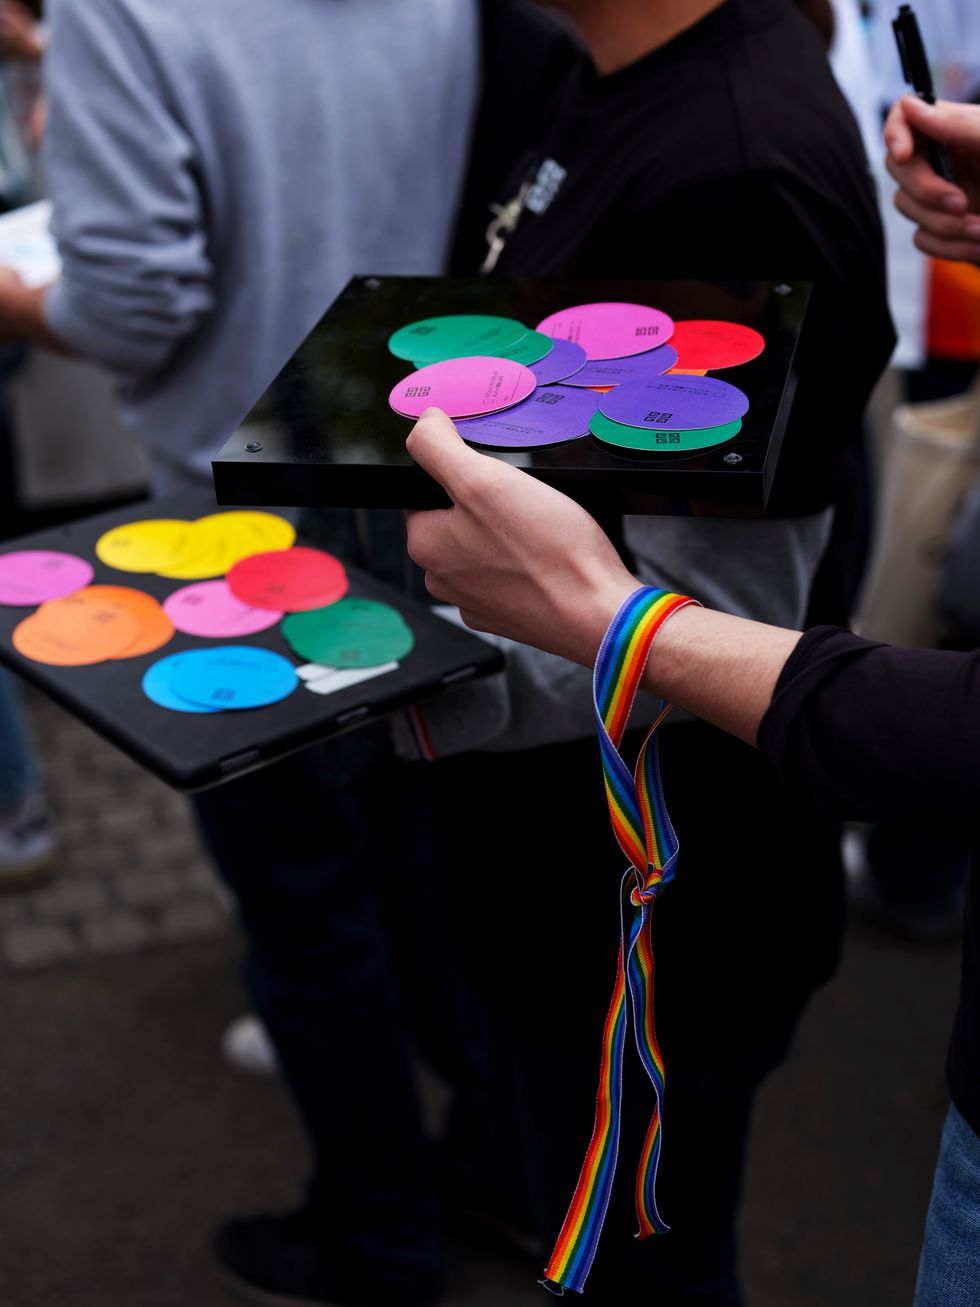 a person holding a device with colorful circles on it